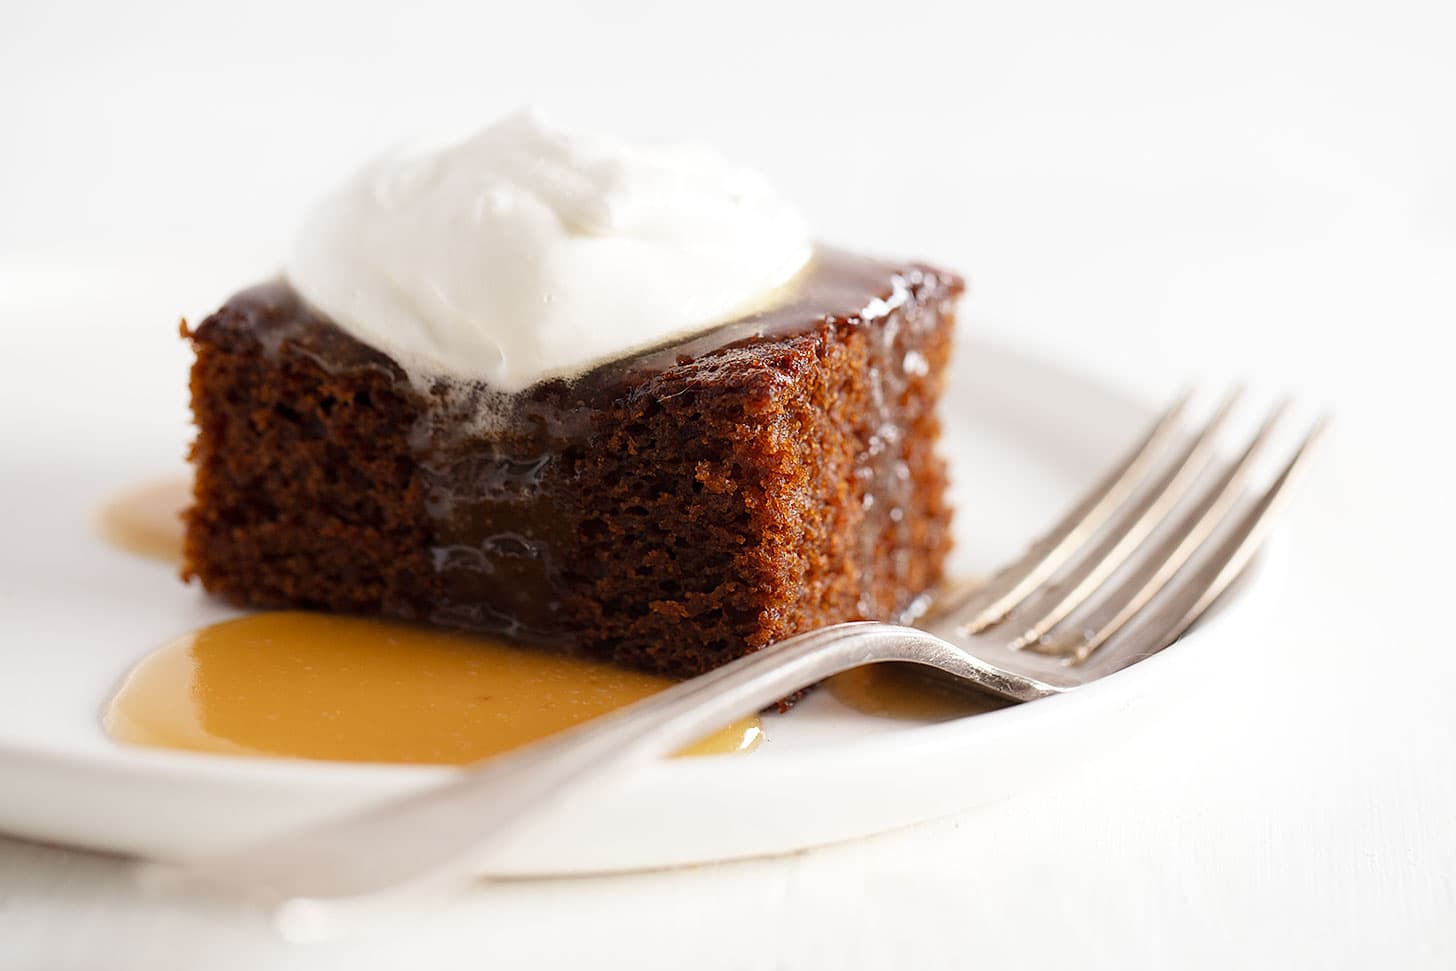 gingerbread cake on plate with caramel sauce and whipped cream